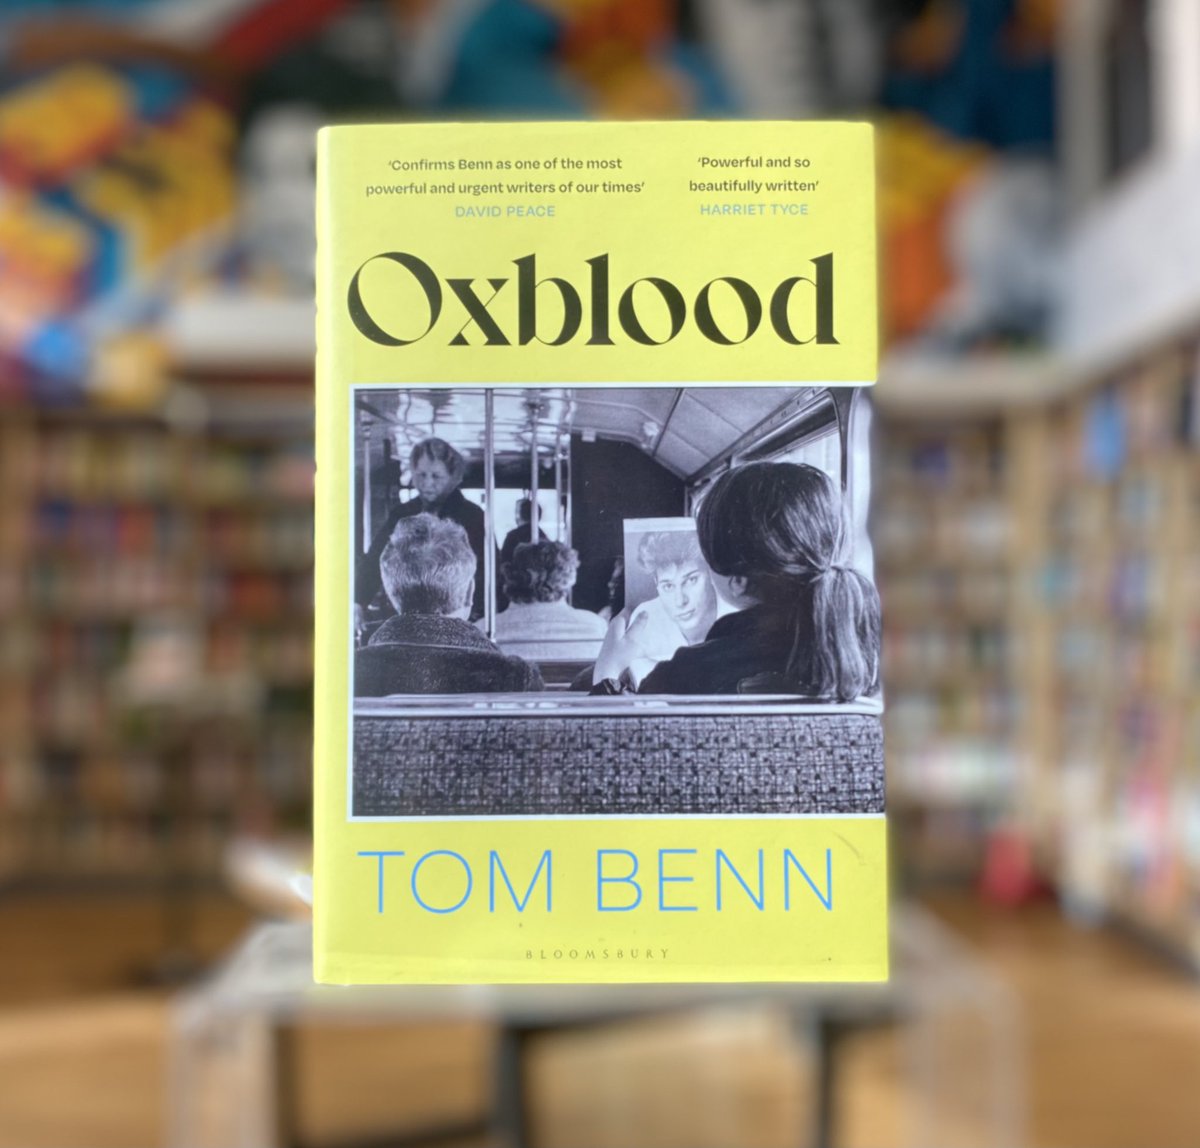 Huge congratulations to @Tom_Benn who won the 2022 #YoungWriterAward last night with his stunning novel OXBLOOD. Set in 1980s Wythenshawe, it’s the story of the Dodds family, who once ruled the Manchester underworld, and the legacy they leave behind. Available instore now!